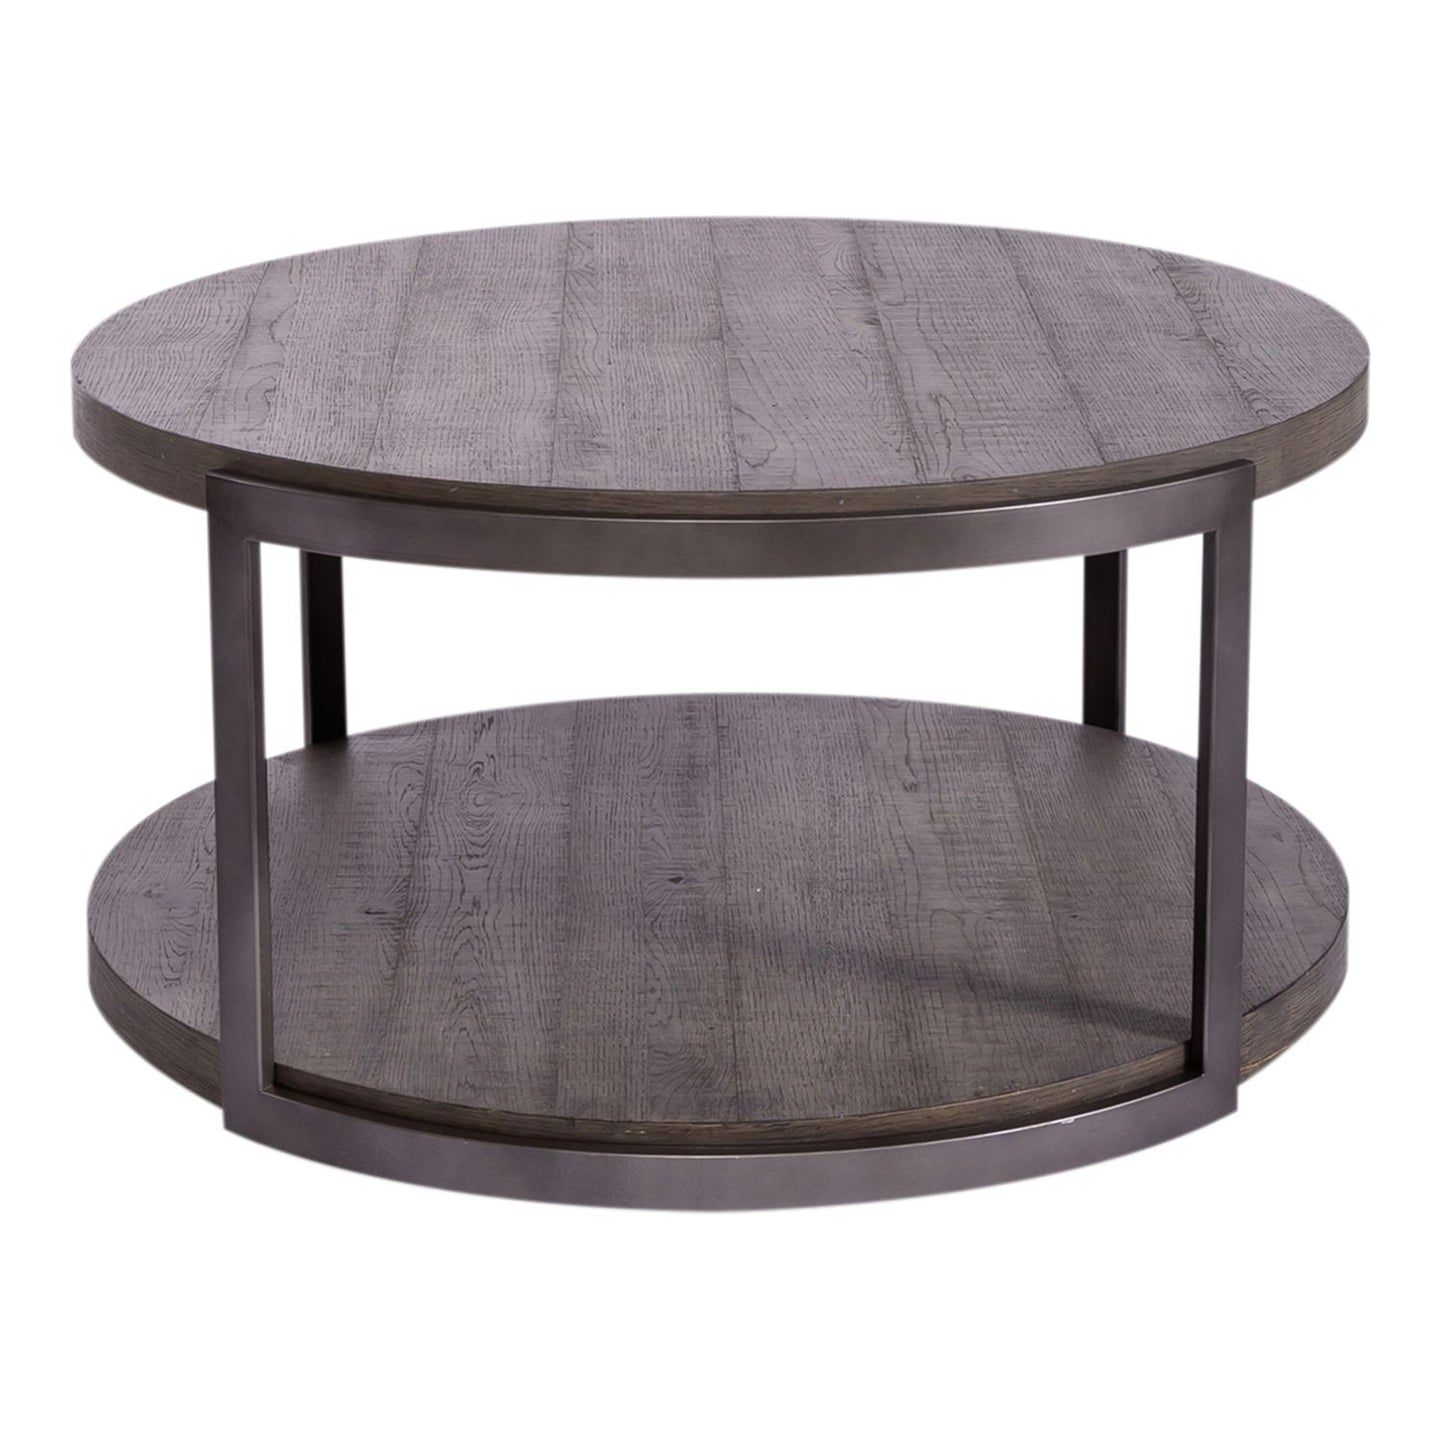 Modern View - Round Cocktail Table